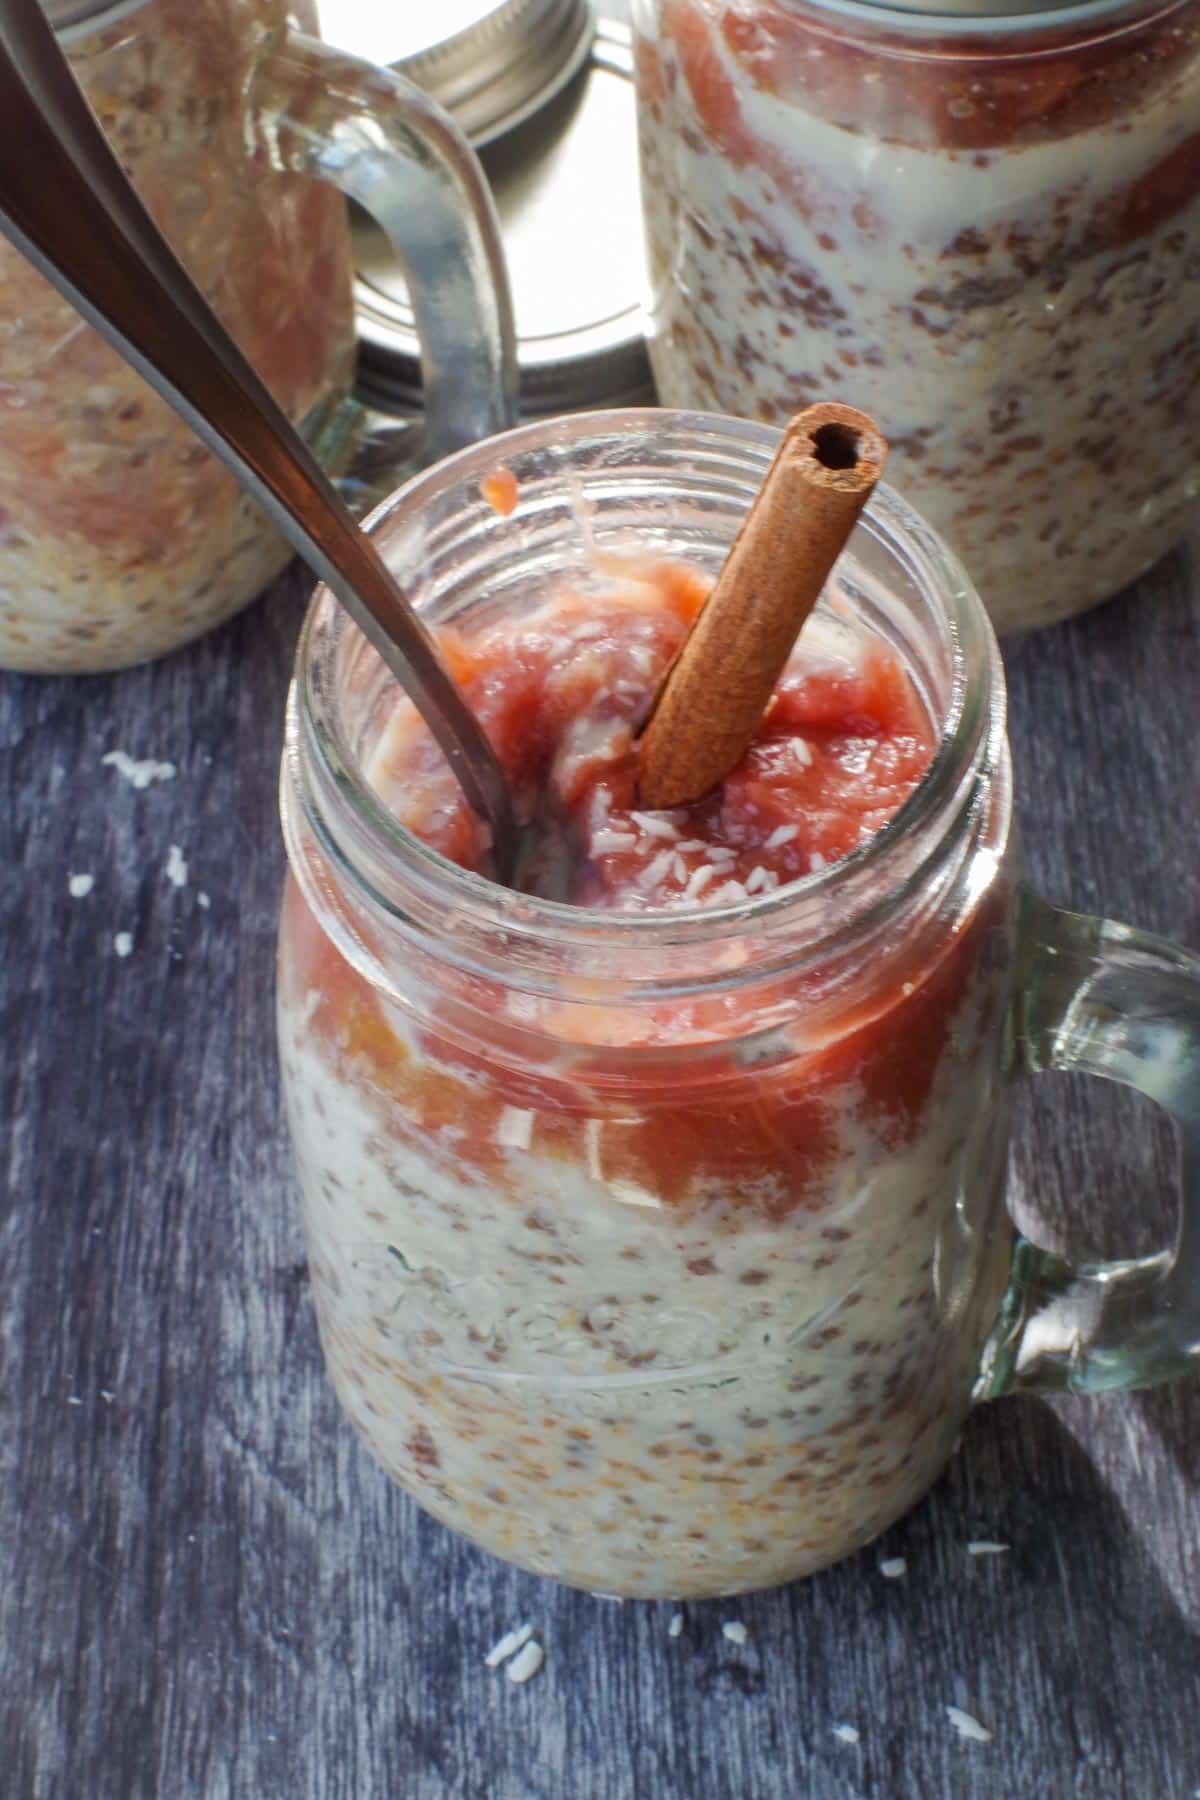 rhubarb overnight oats in a jar with 2 other jars in the background